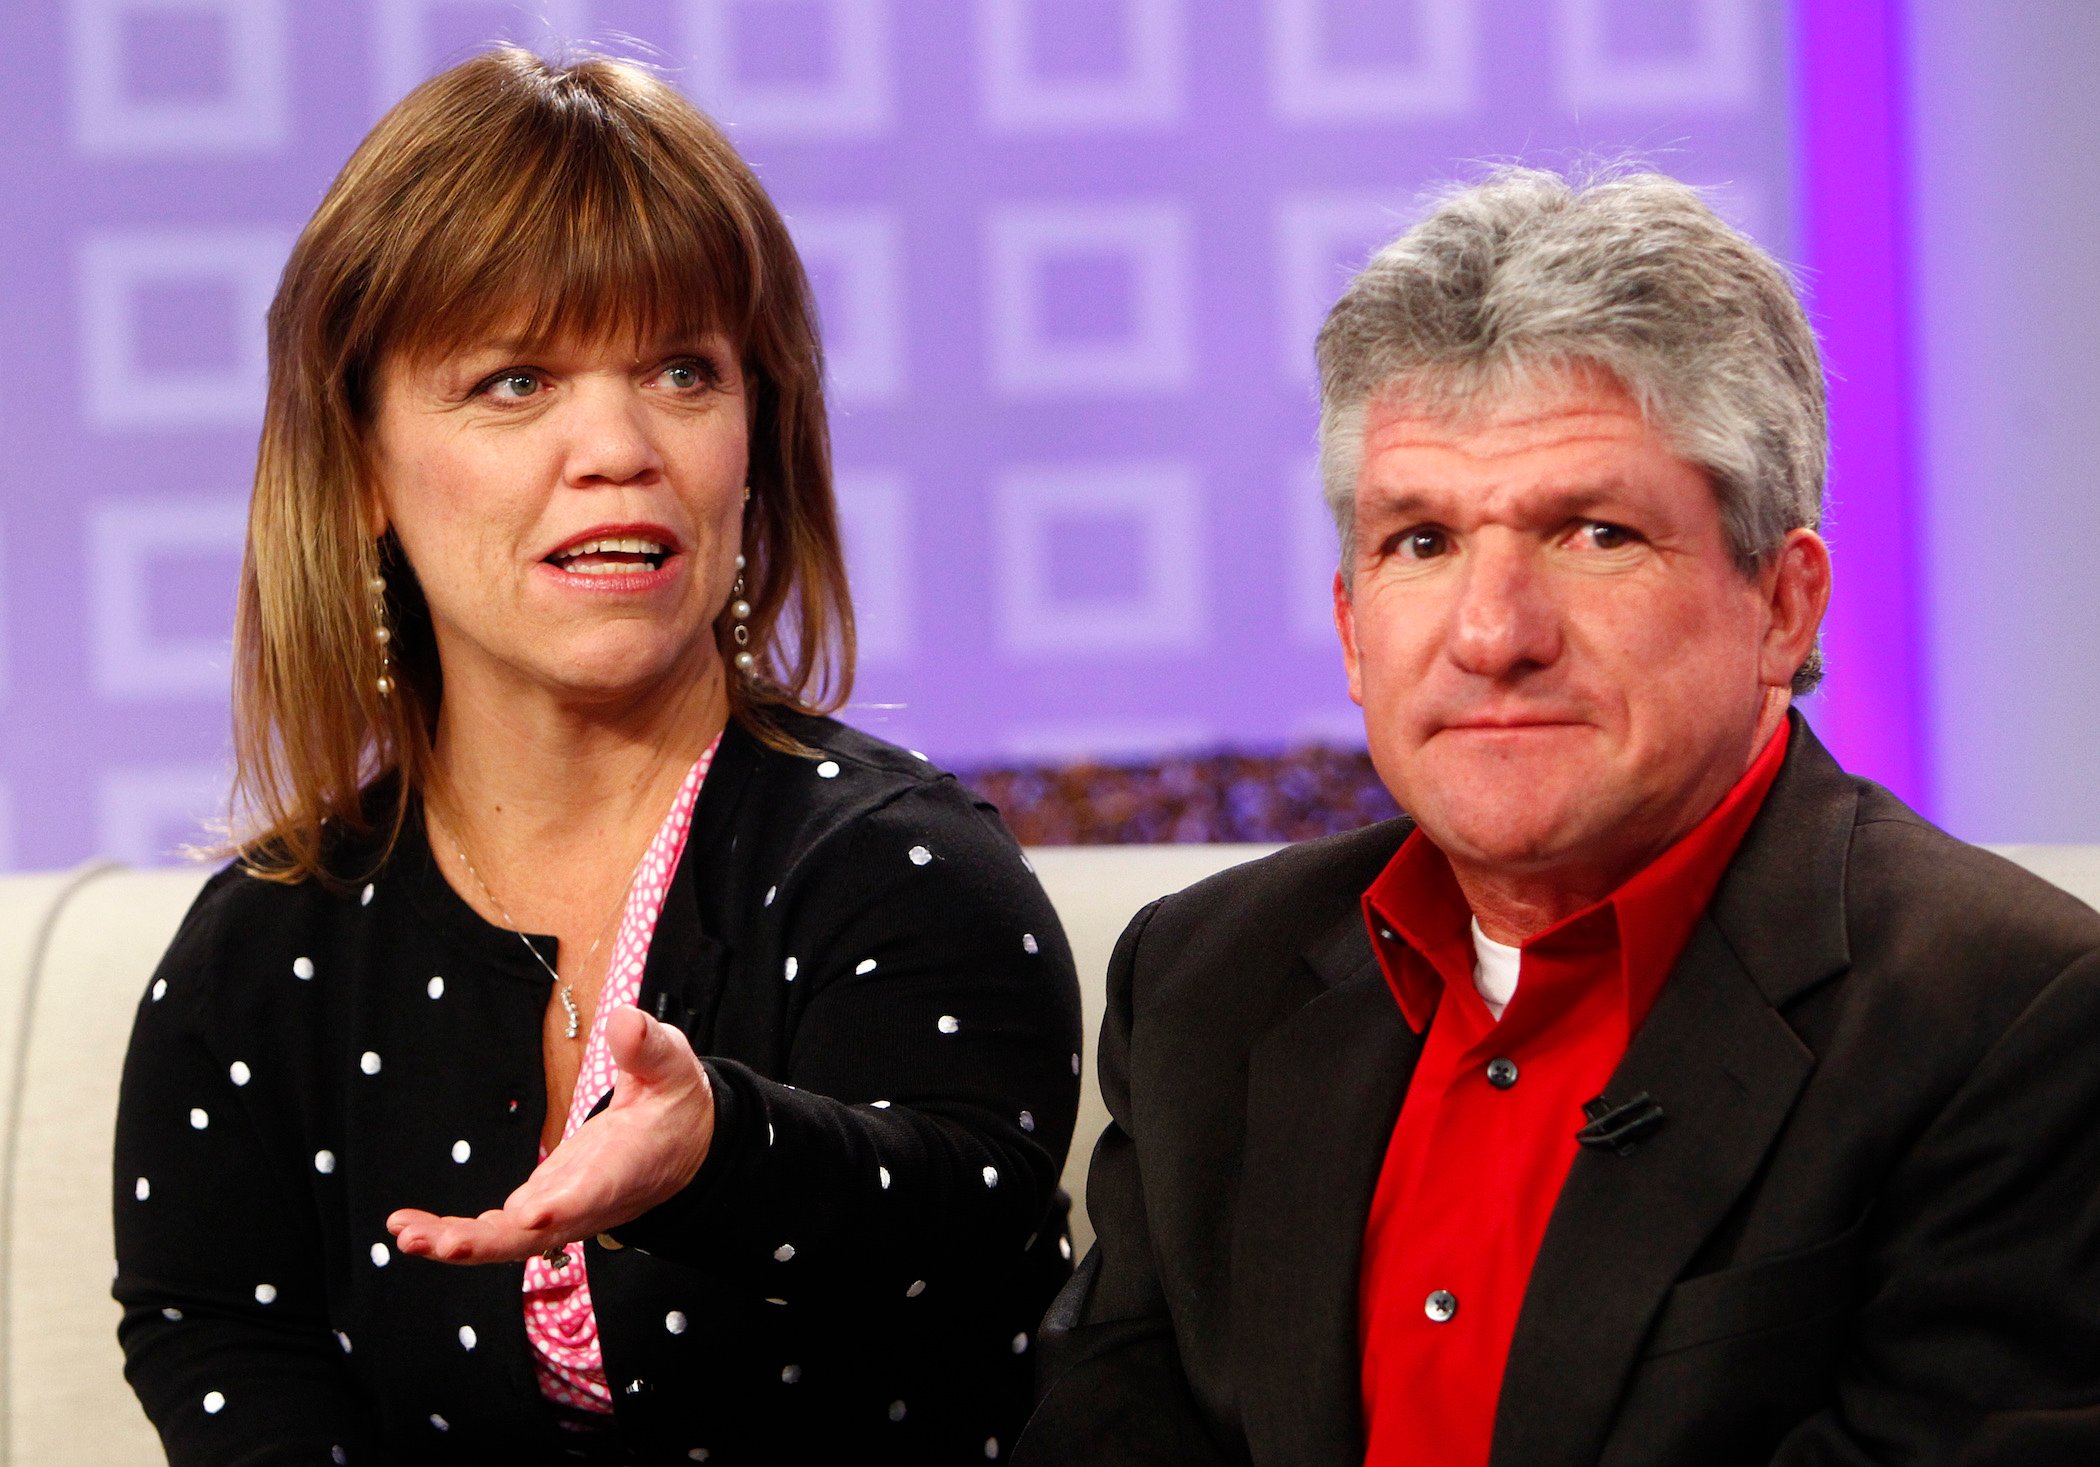 Amy Roloff and Matt Roloff from 'Little People, Big World' and Roloff Farms sitting together on a couch against a purple background